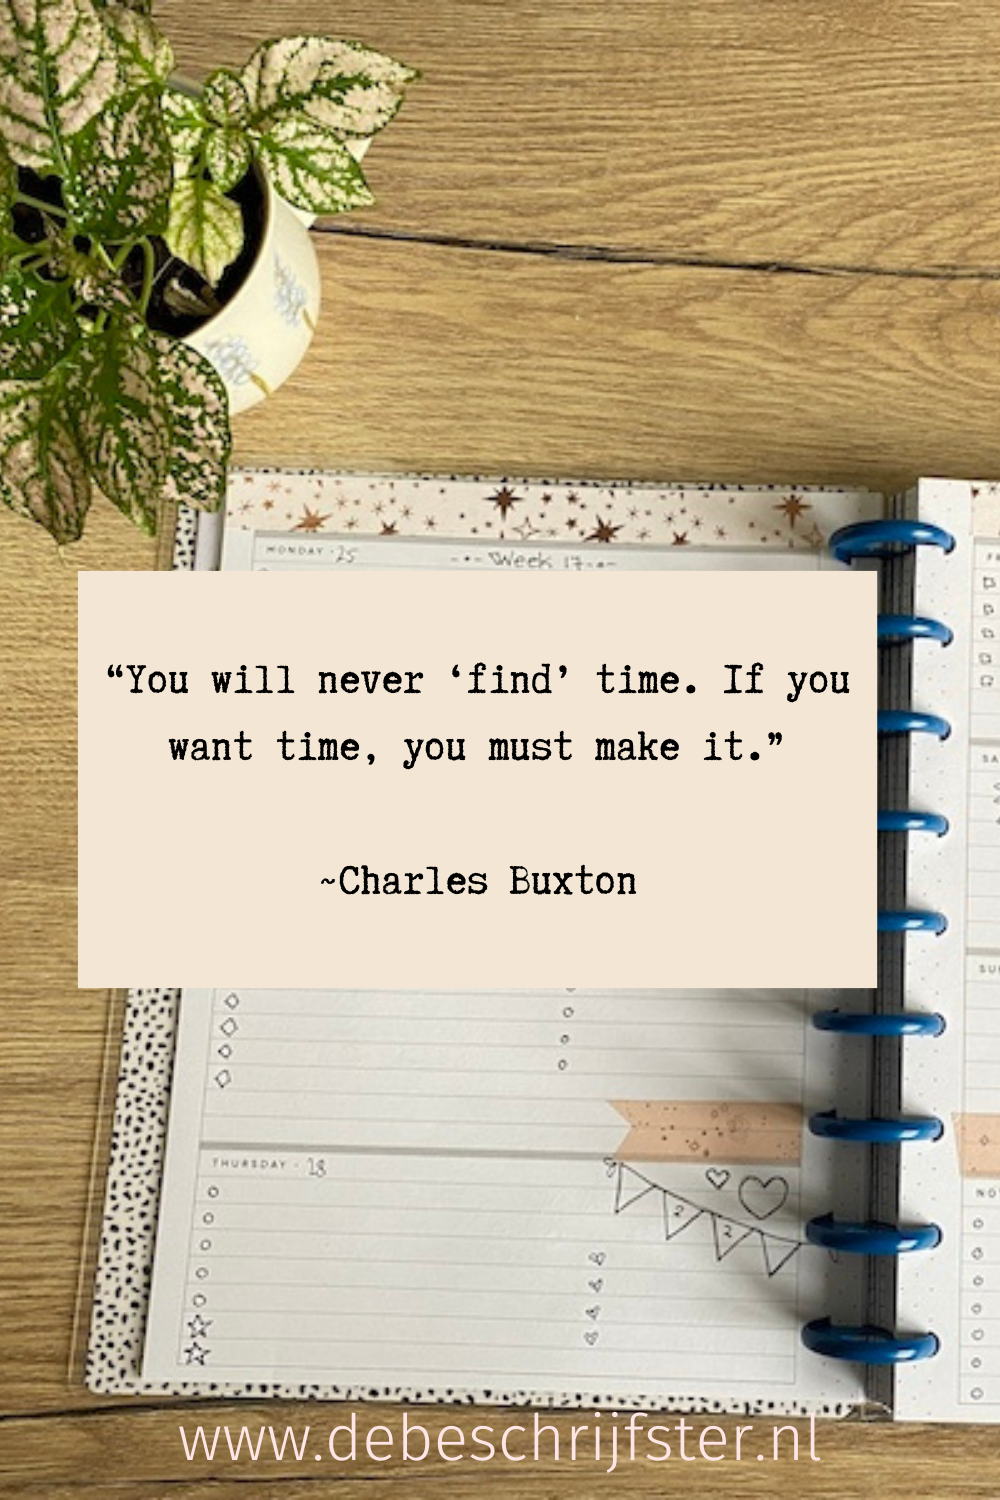 ‘You will never ‘find’ more time for anything. If you want time, you must make it.’ Charles Buxton